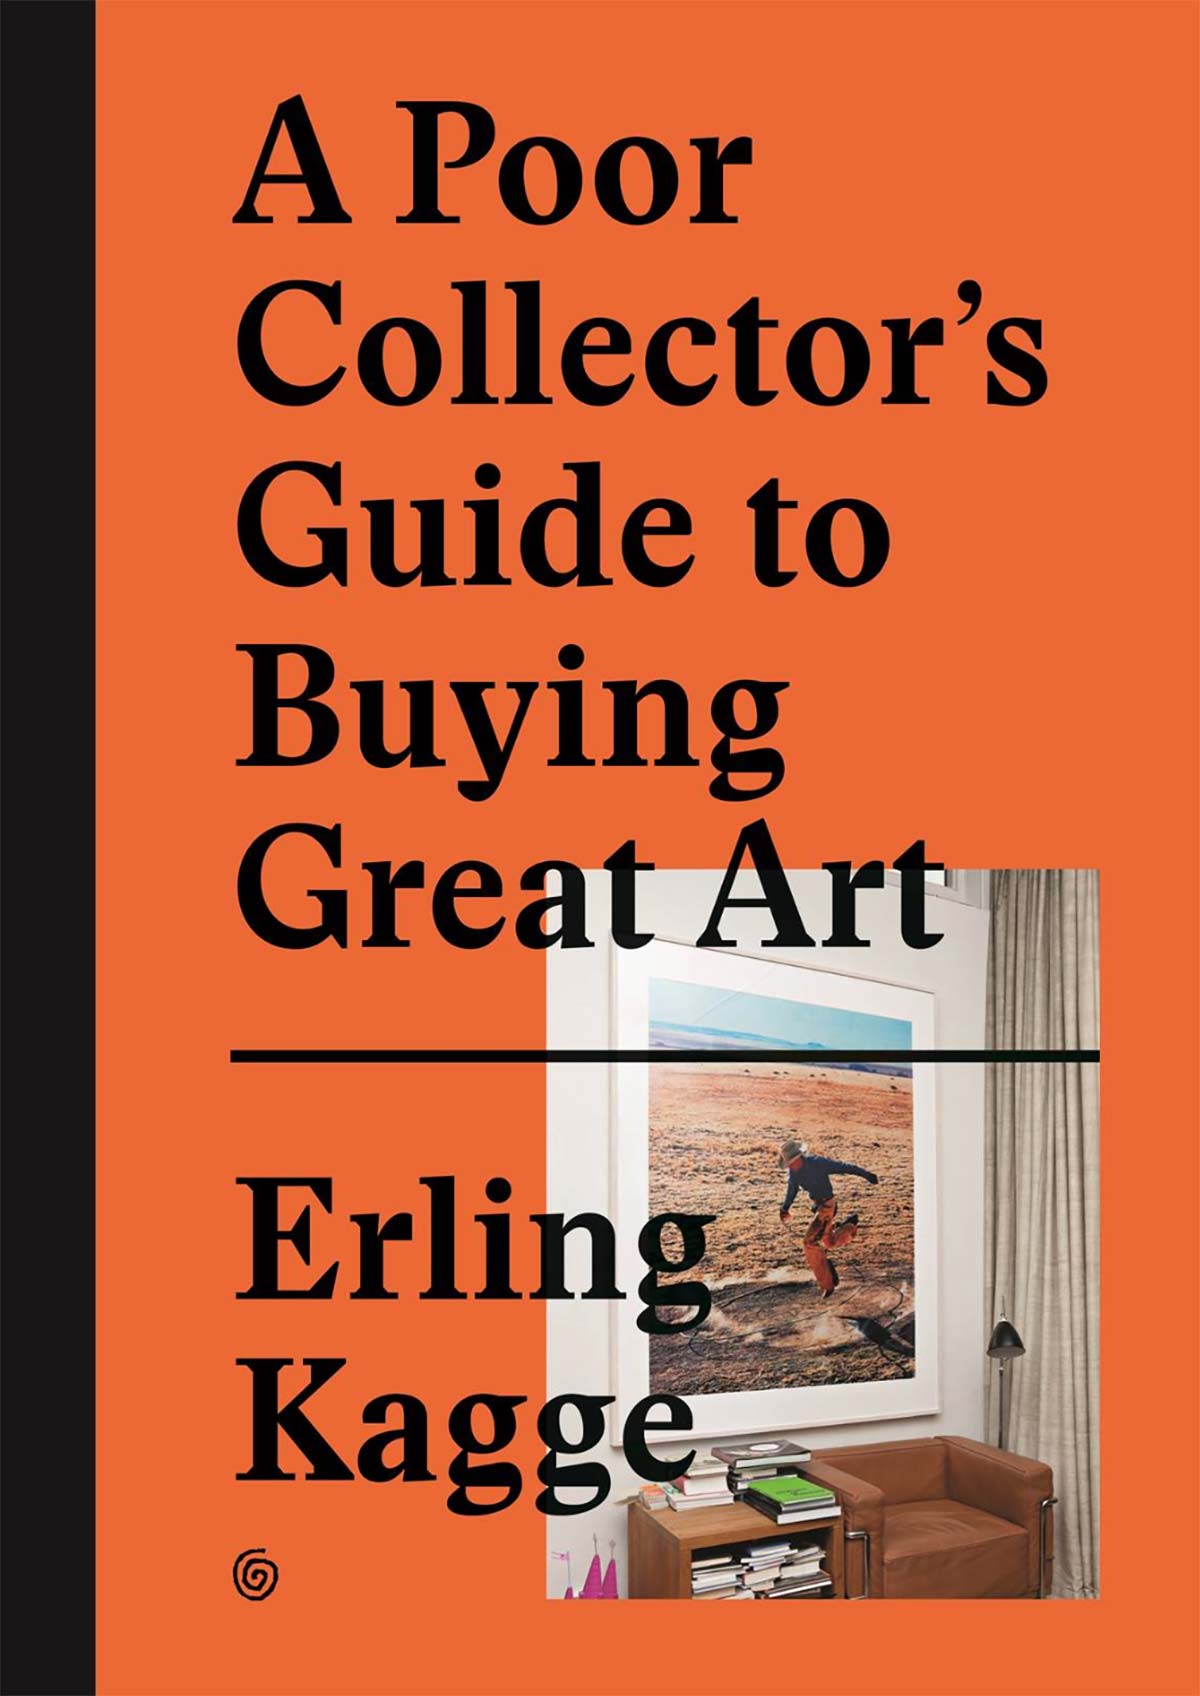 A Poor Collector’s Guide to Buying Great Art